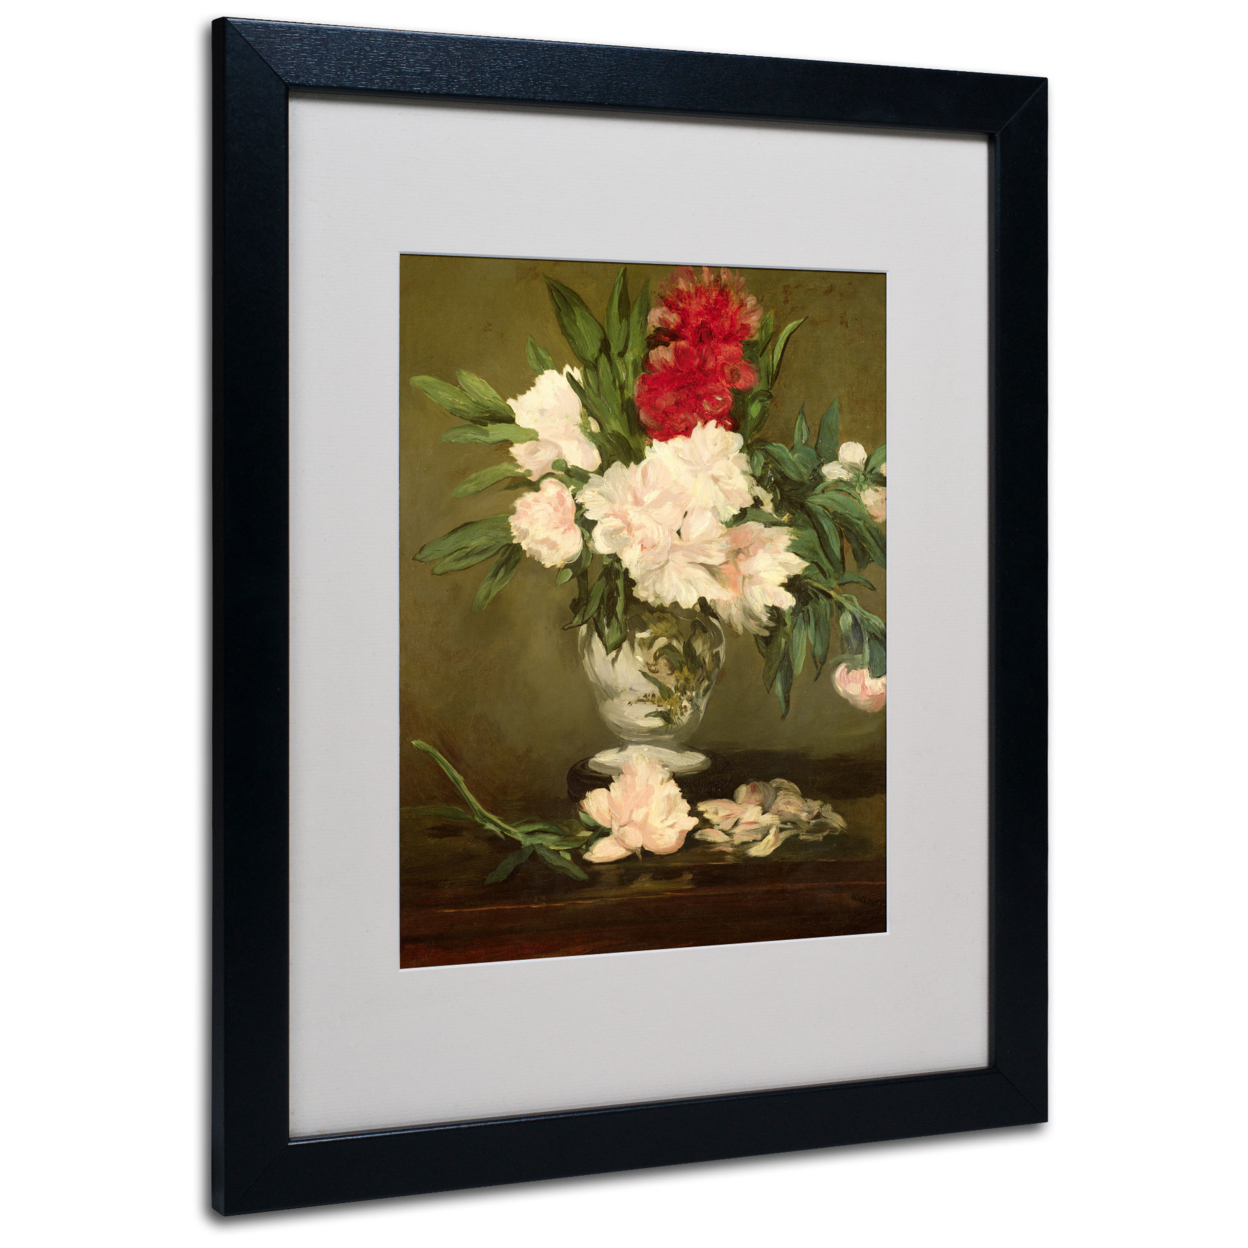 Edouard Manet 'Vase Of Peonies 1864' Black Wooden Framed Art 18 X 22 Inches